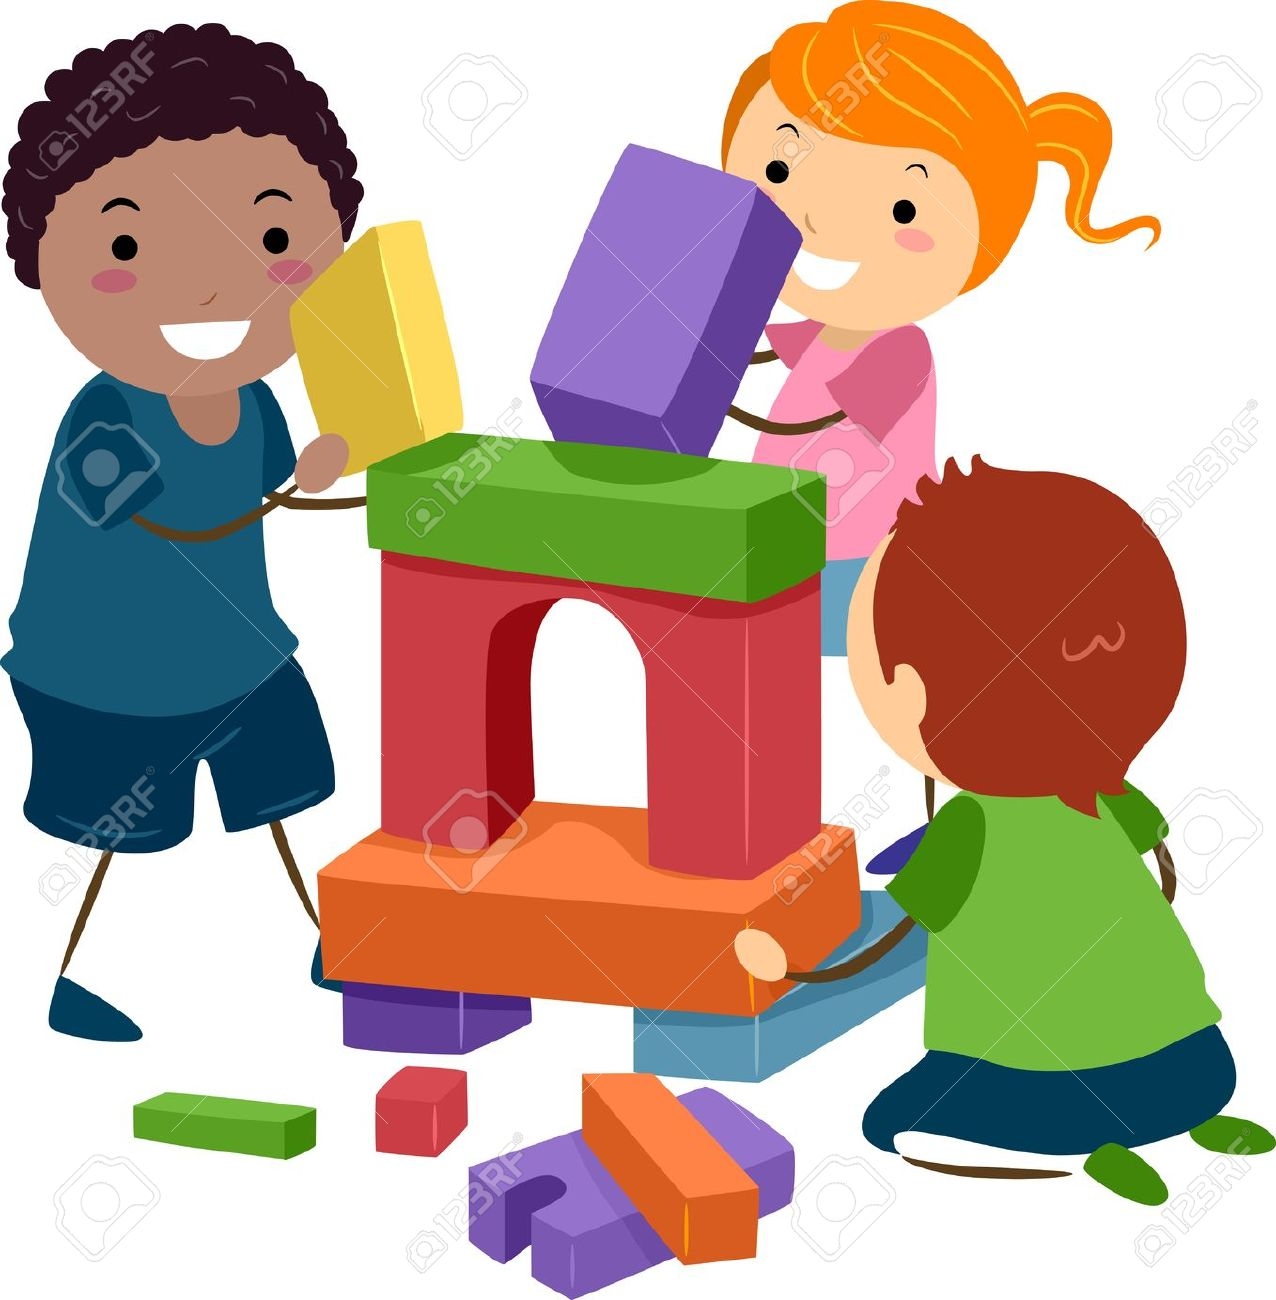 Kids Playing With Toys Clipart.